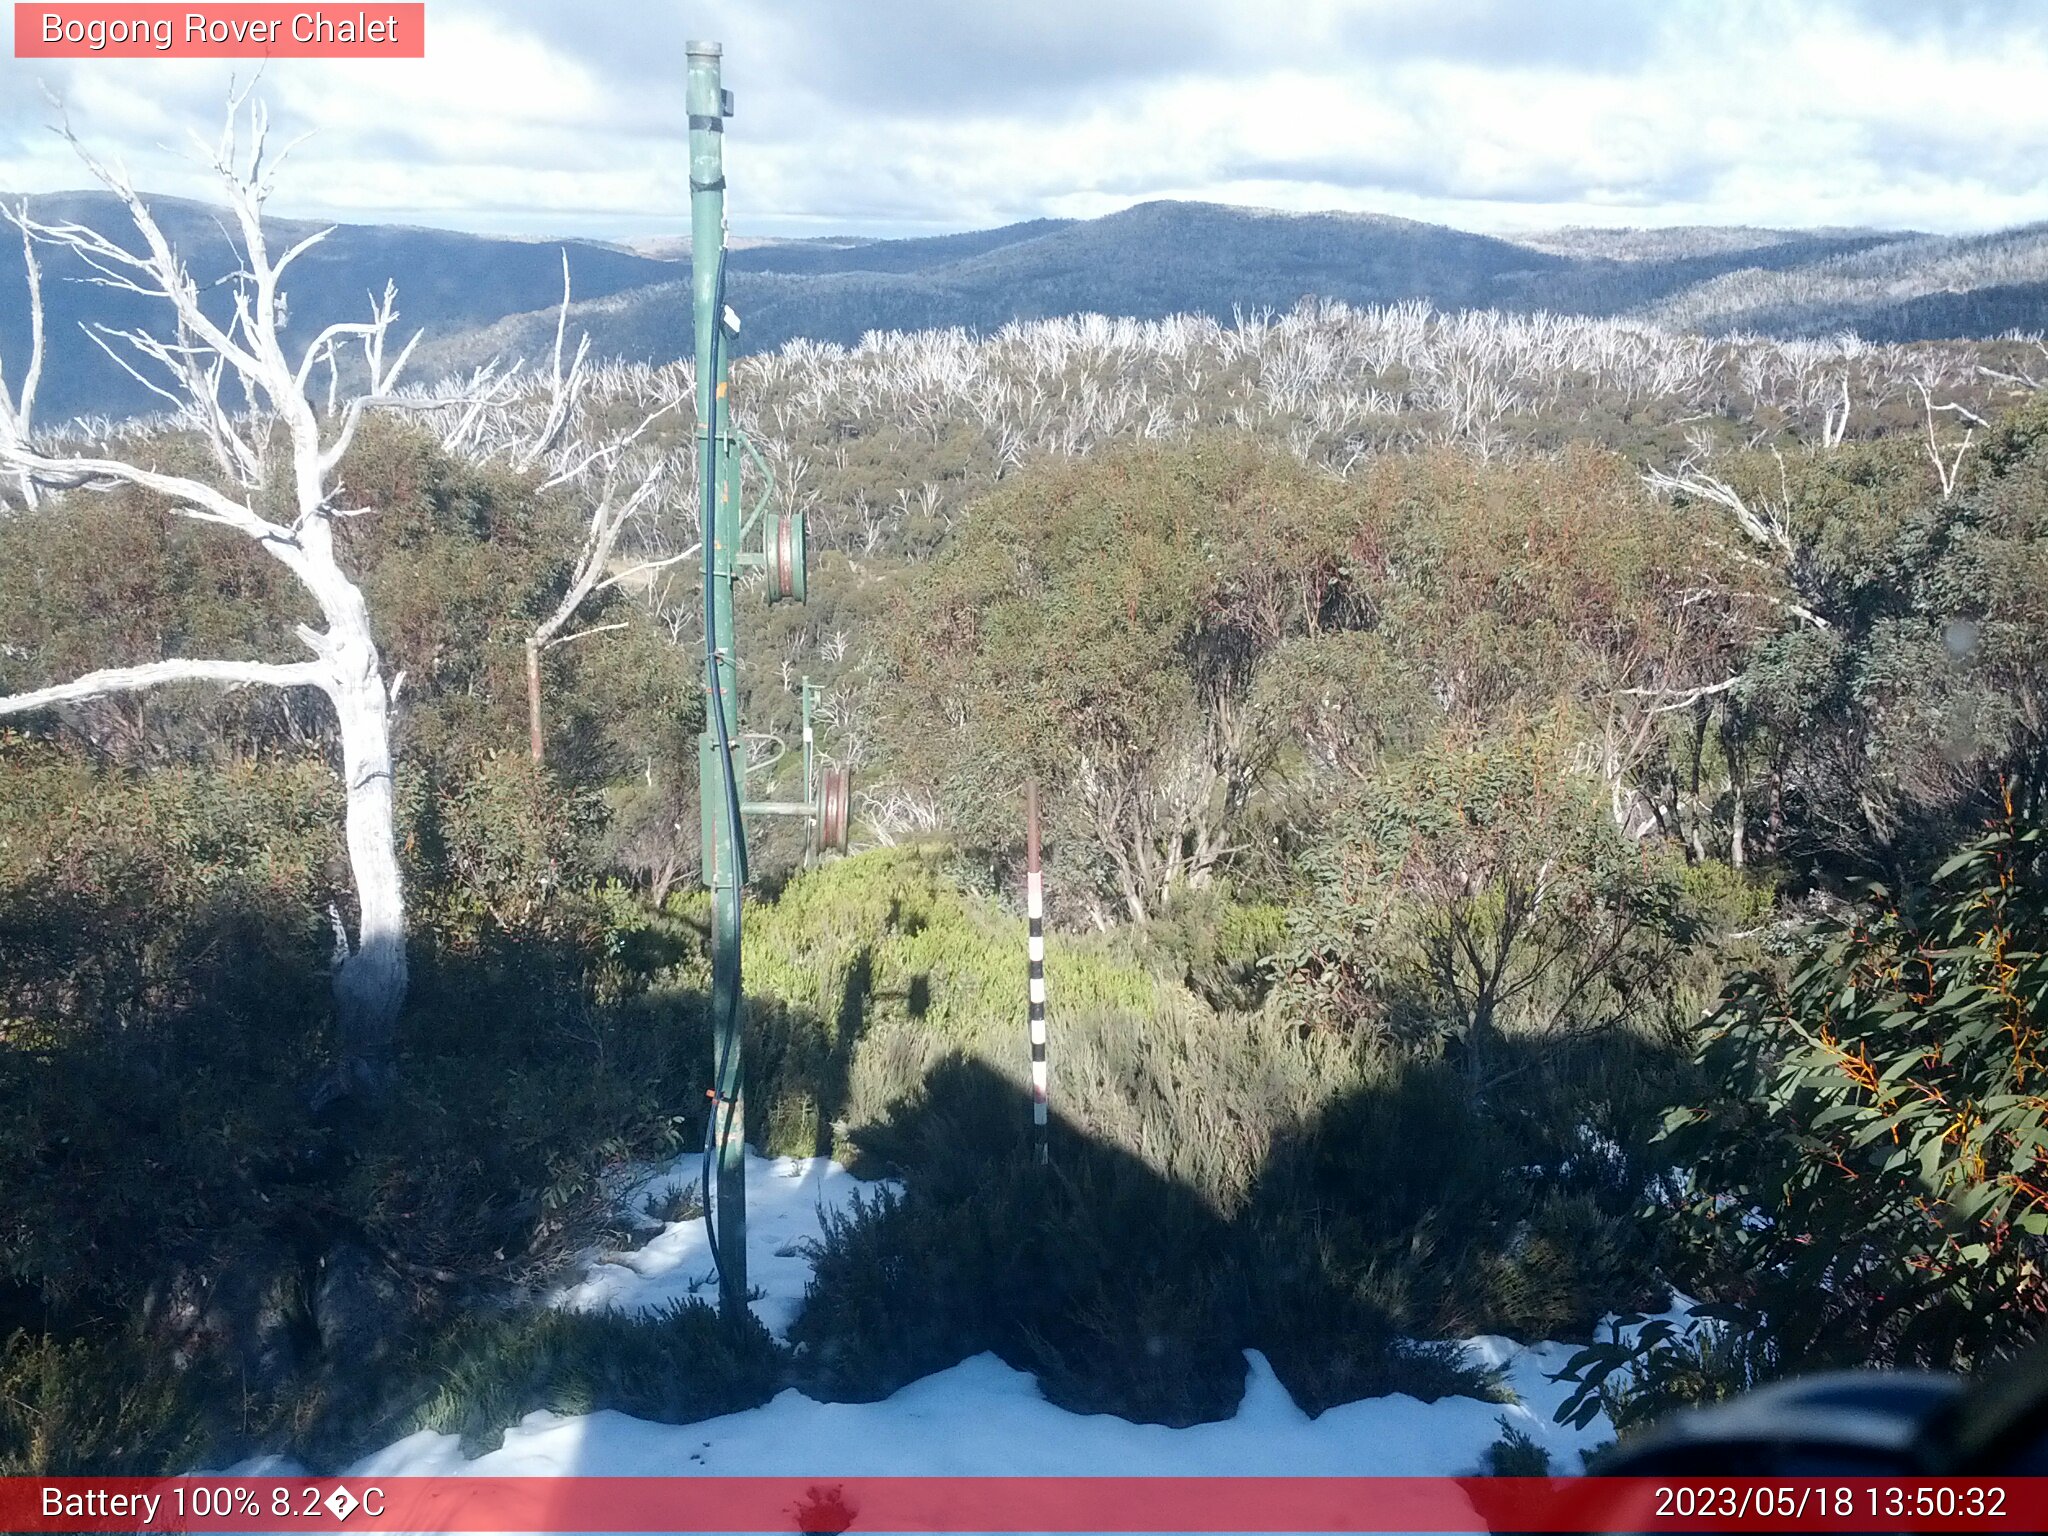 Bogong Web Cam 1:50pm Thursday 18th of May 2023